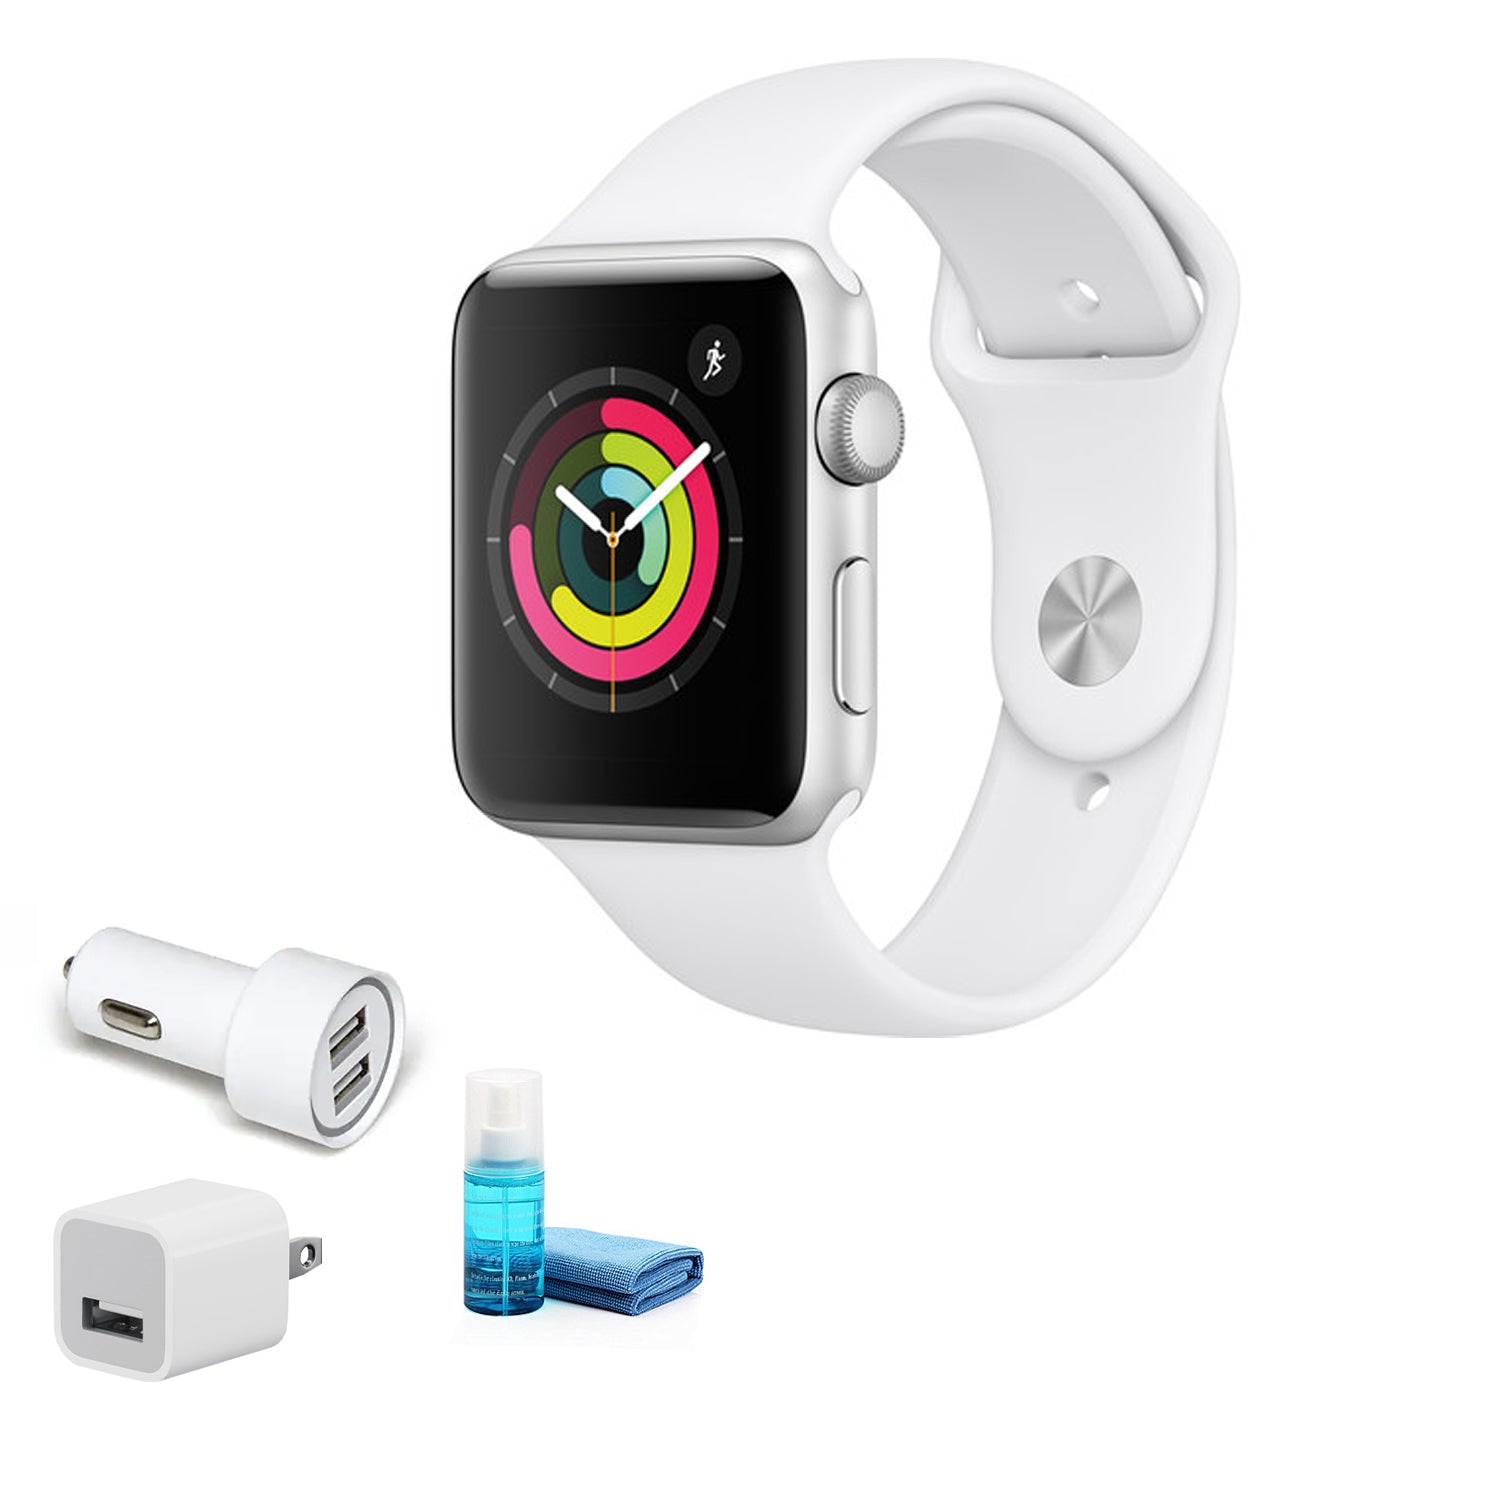 Apple Watch Series 3 Smartwatch 42mm (White Sport Band)- Kit with USB Adapter